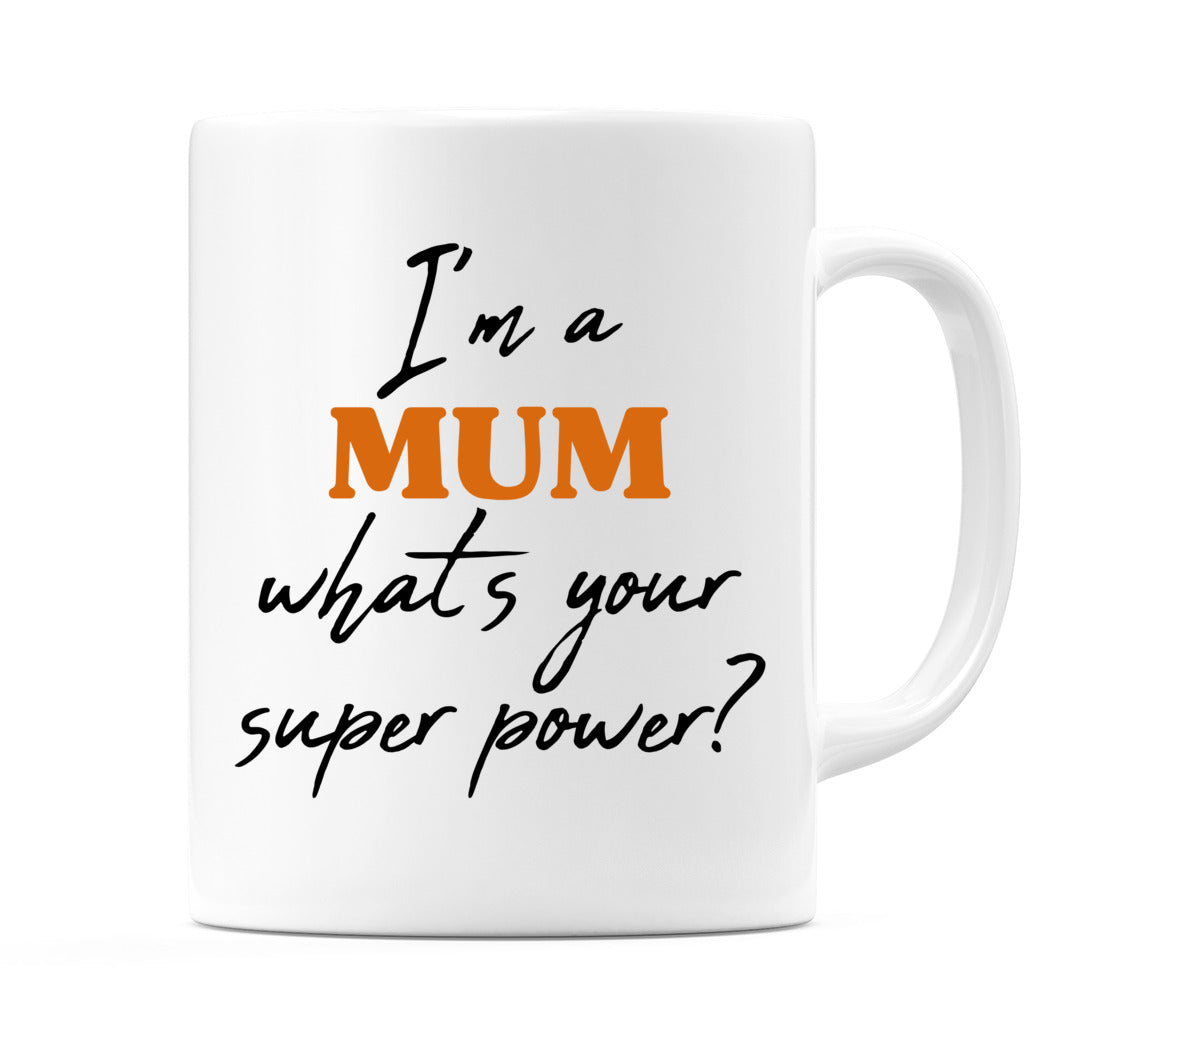 I'm a MUM what's your super power?